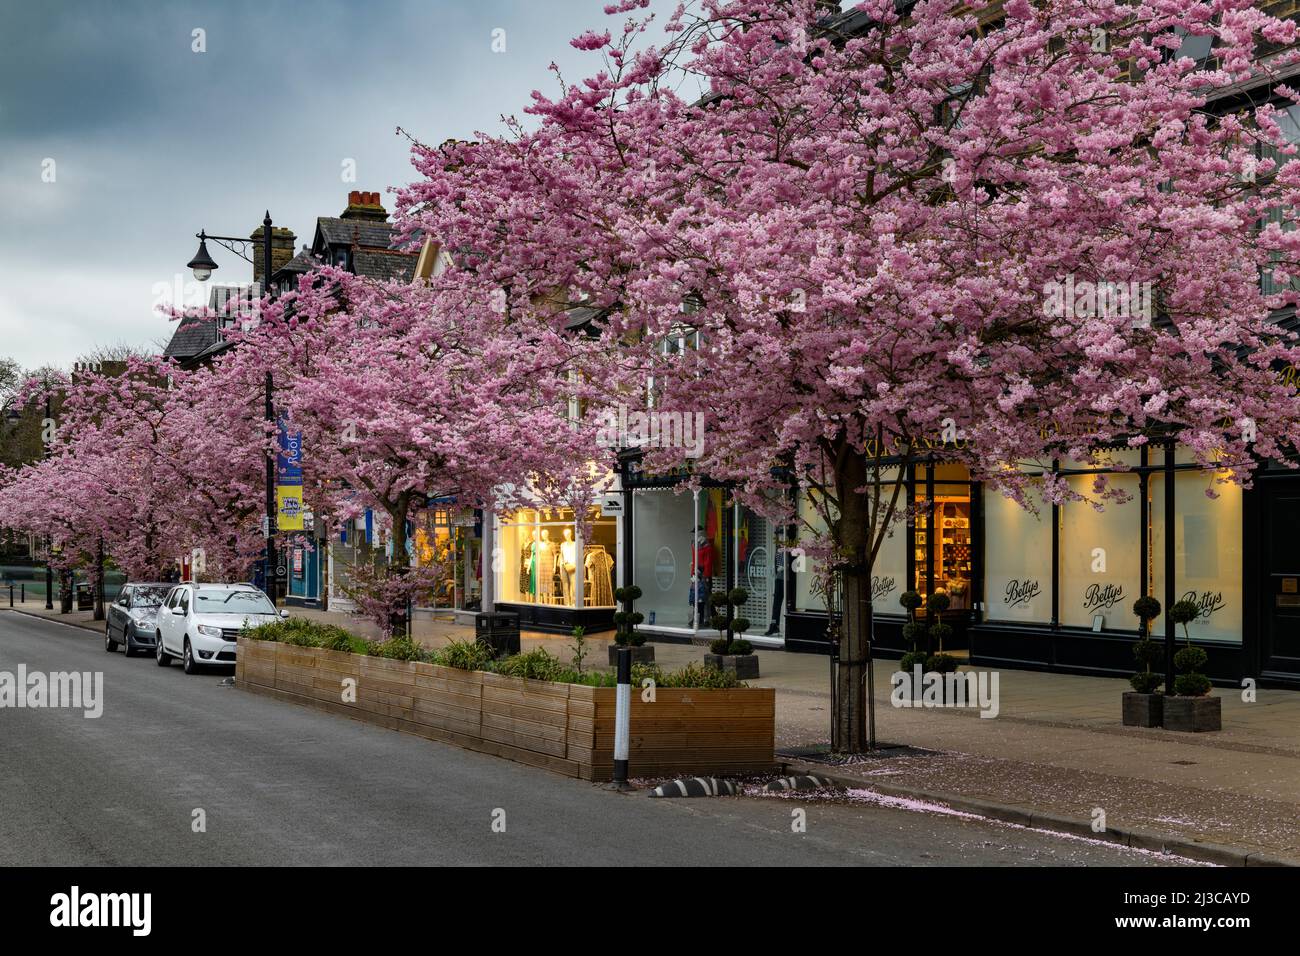 Scenic spring town centre (beautiful colourful cherry trees in bloom, restaurant-cafe shopfront, evening) - The Grove, Ilkley, Yorkshire, England, UK. Stock Photo